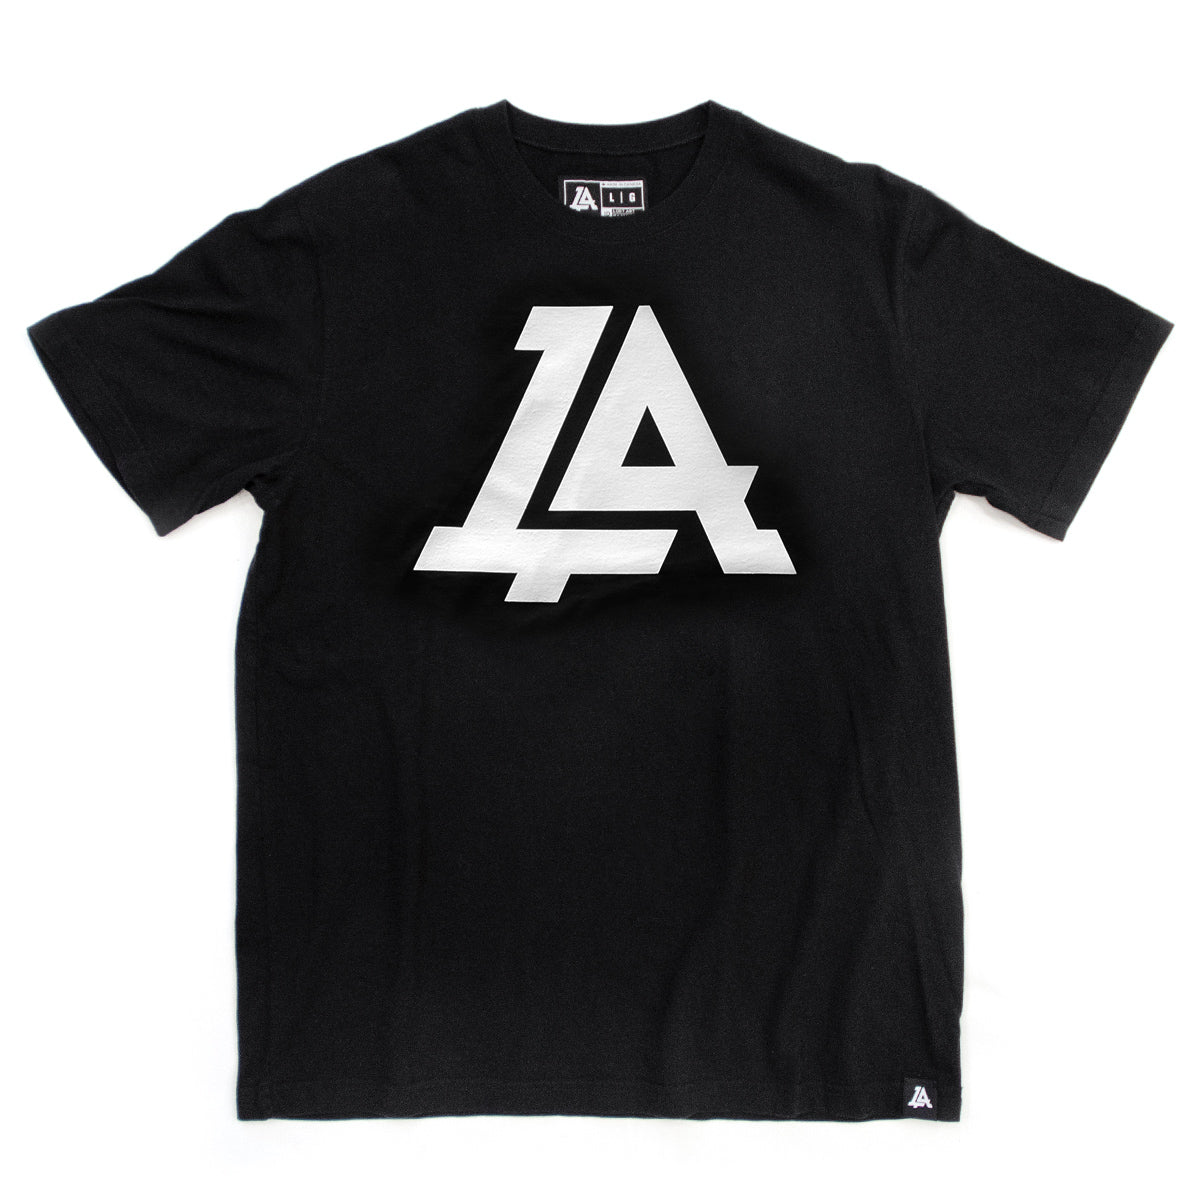 Lost Art Canada - white on black lost art icon logo tee front view